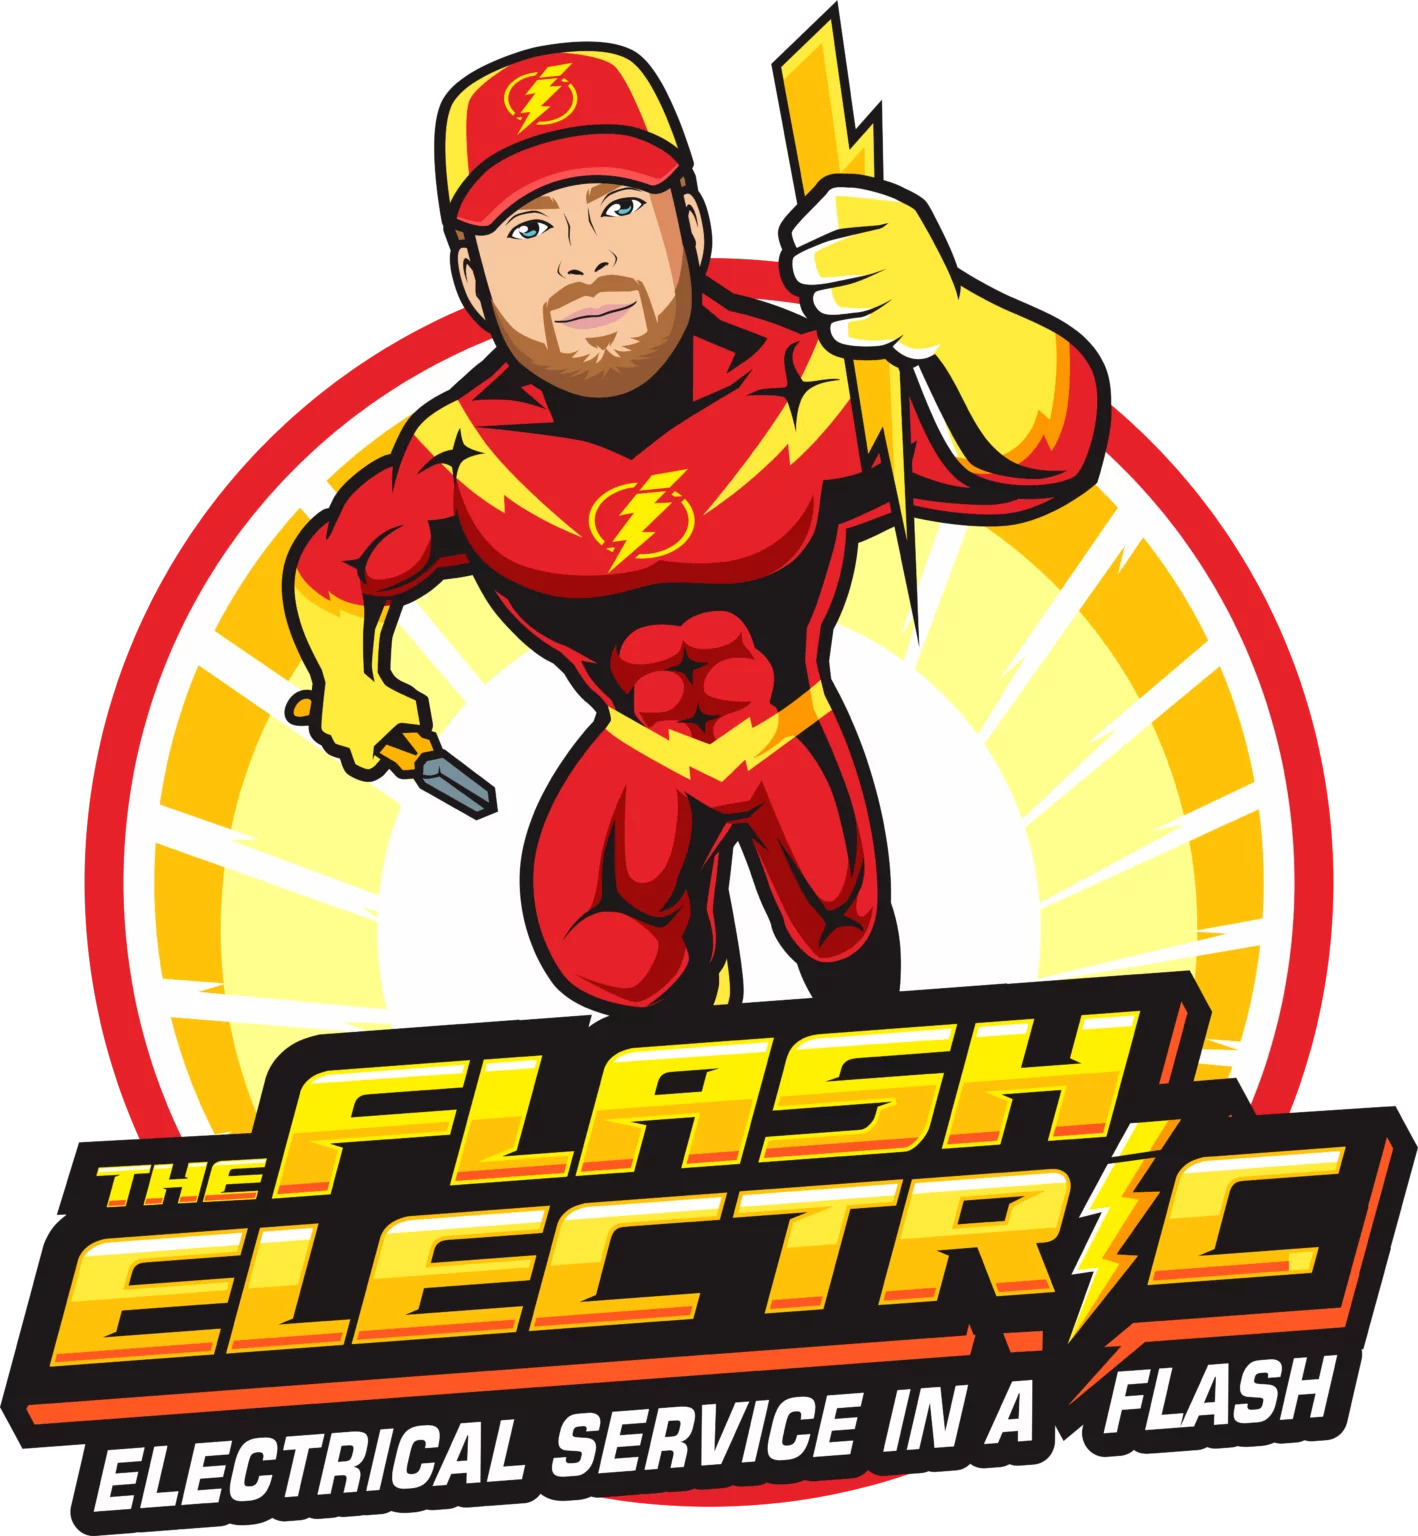 The-Flash-Electric-The-Flash-Electric-1418x1536.png.jpg